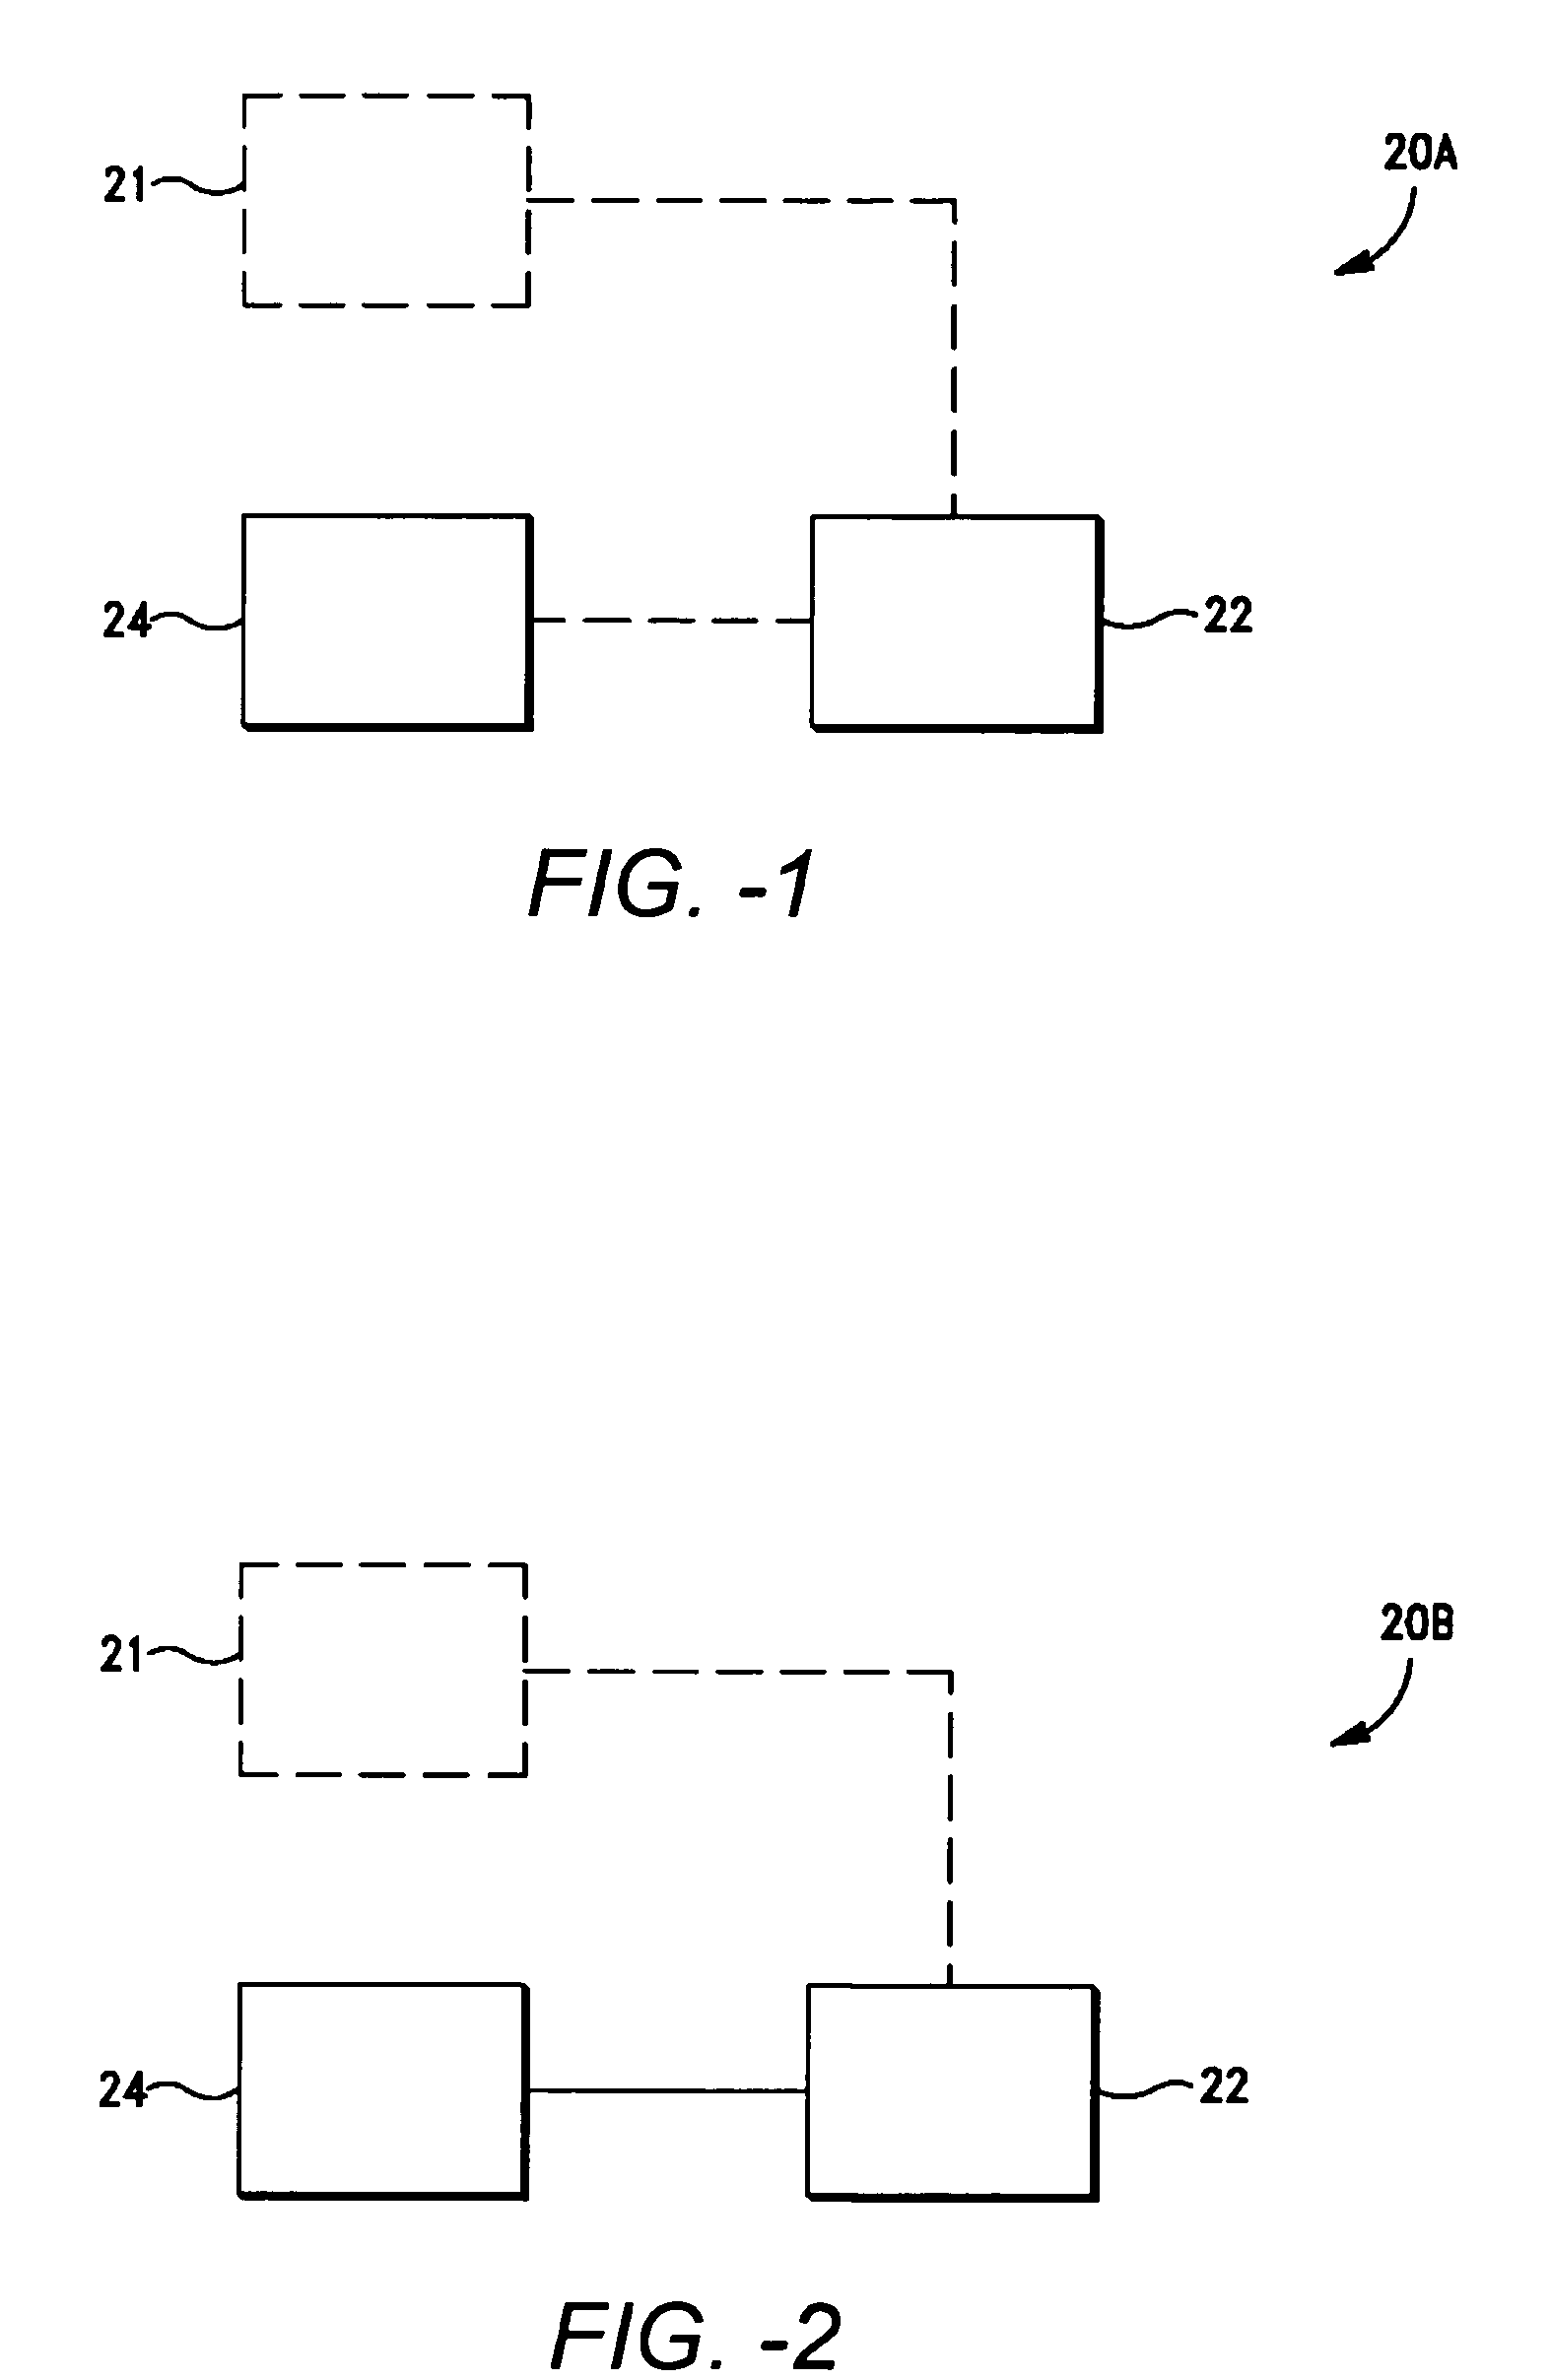 Method and system to control gastrointestinal function by means of neuro-electrical coded signals